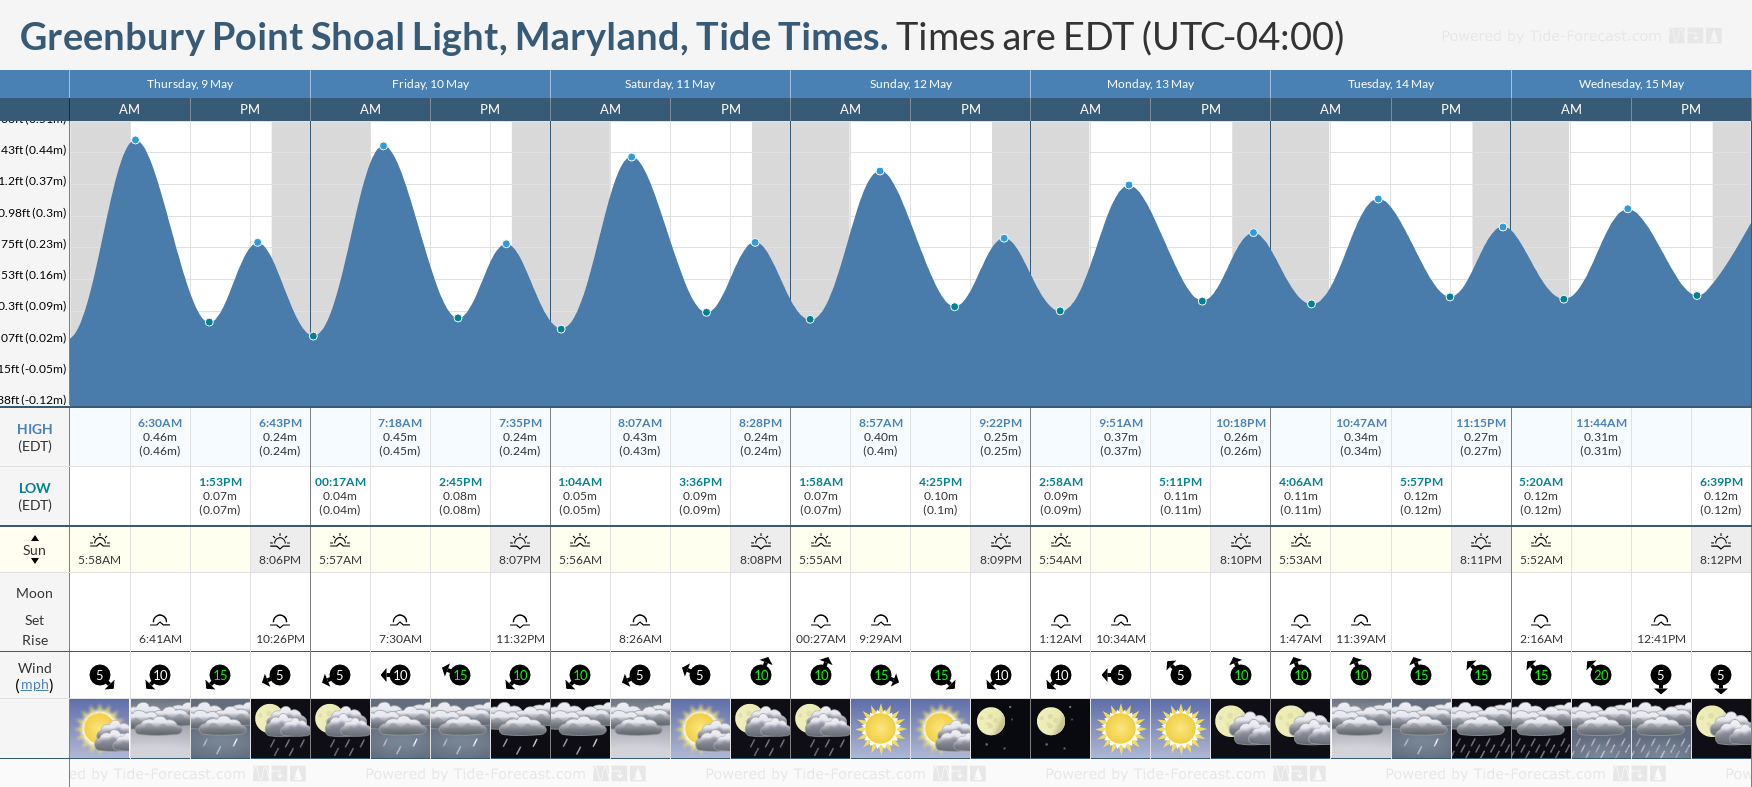 Greenbury Point Shoal Light, Maryland Tide Chart including high and low tide tide times for the next 7 days